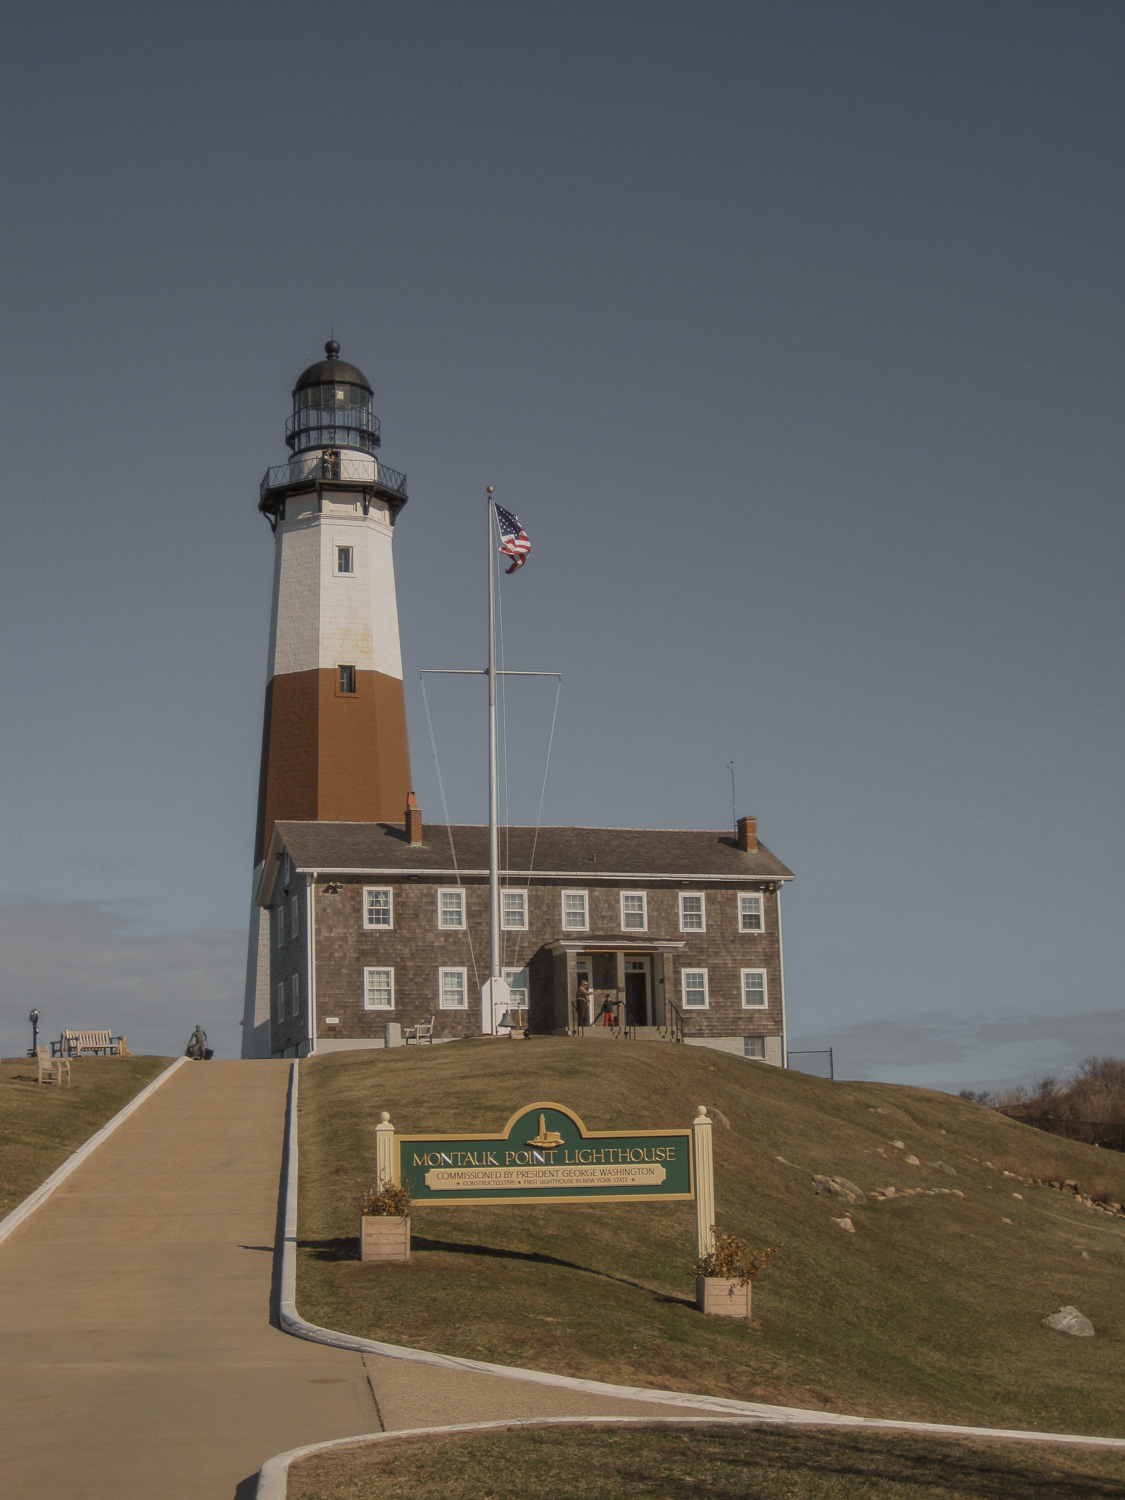 Things to do in montauk